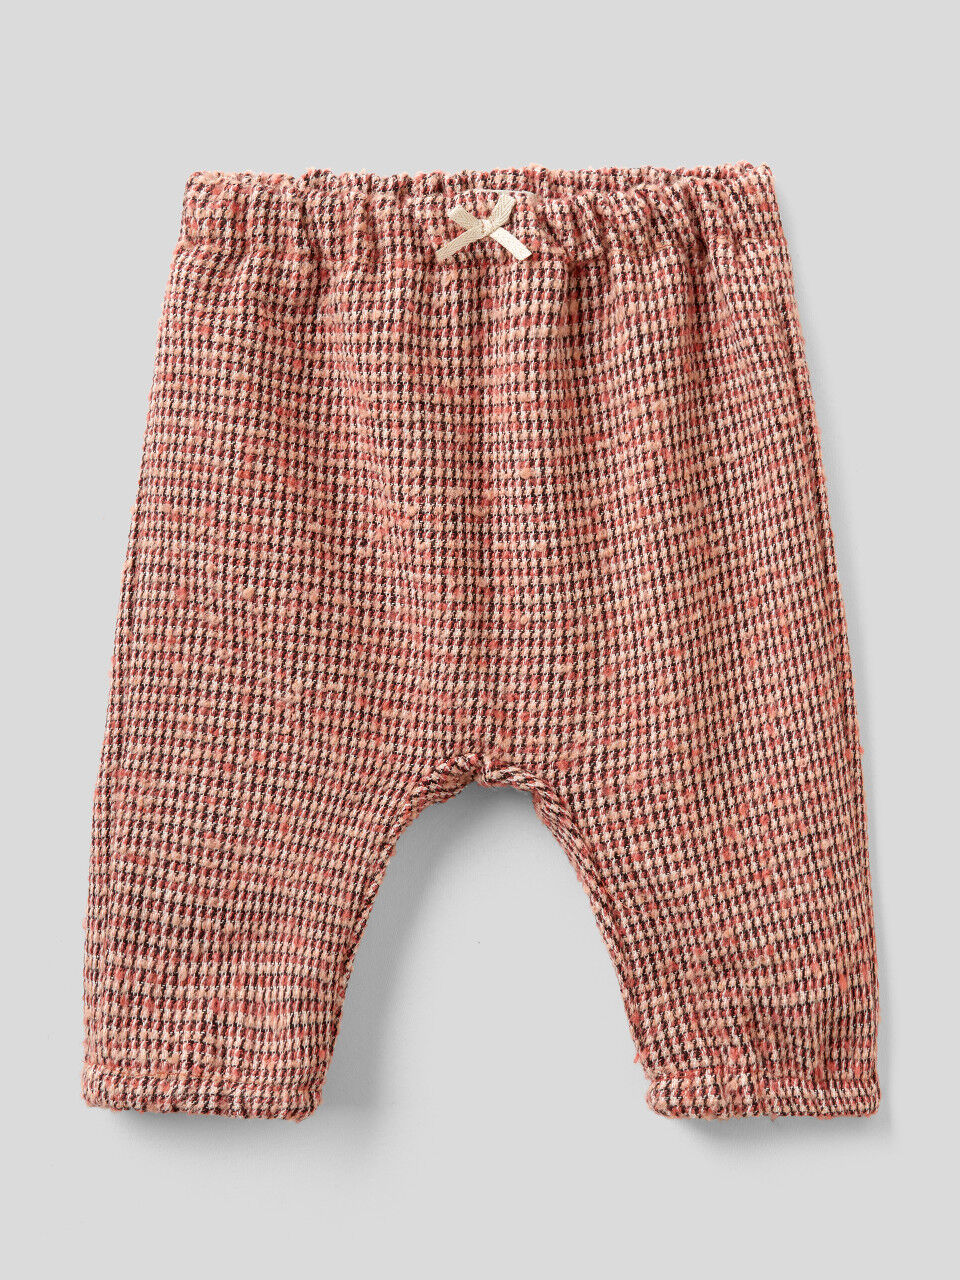 Patterned trousers with bow